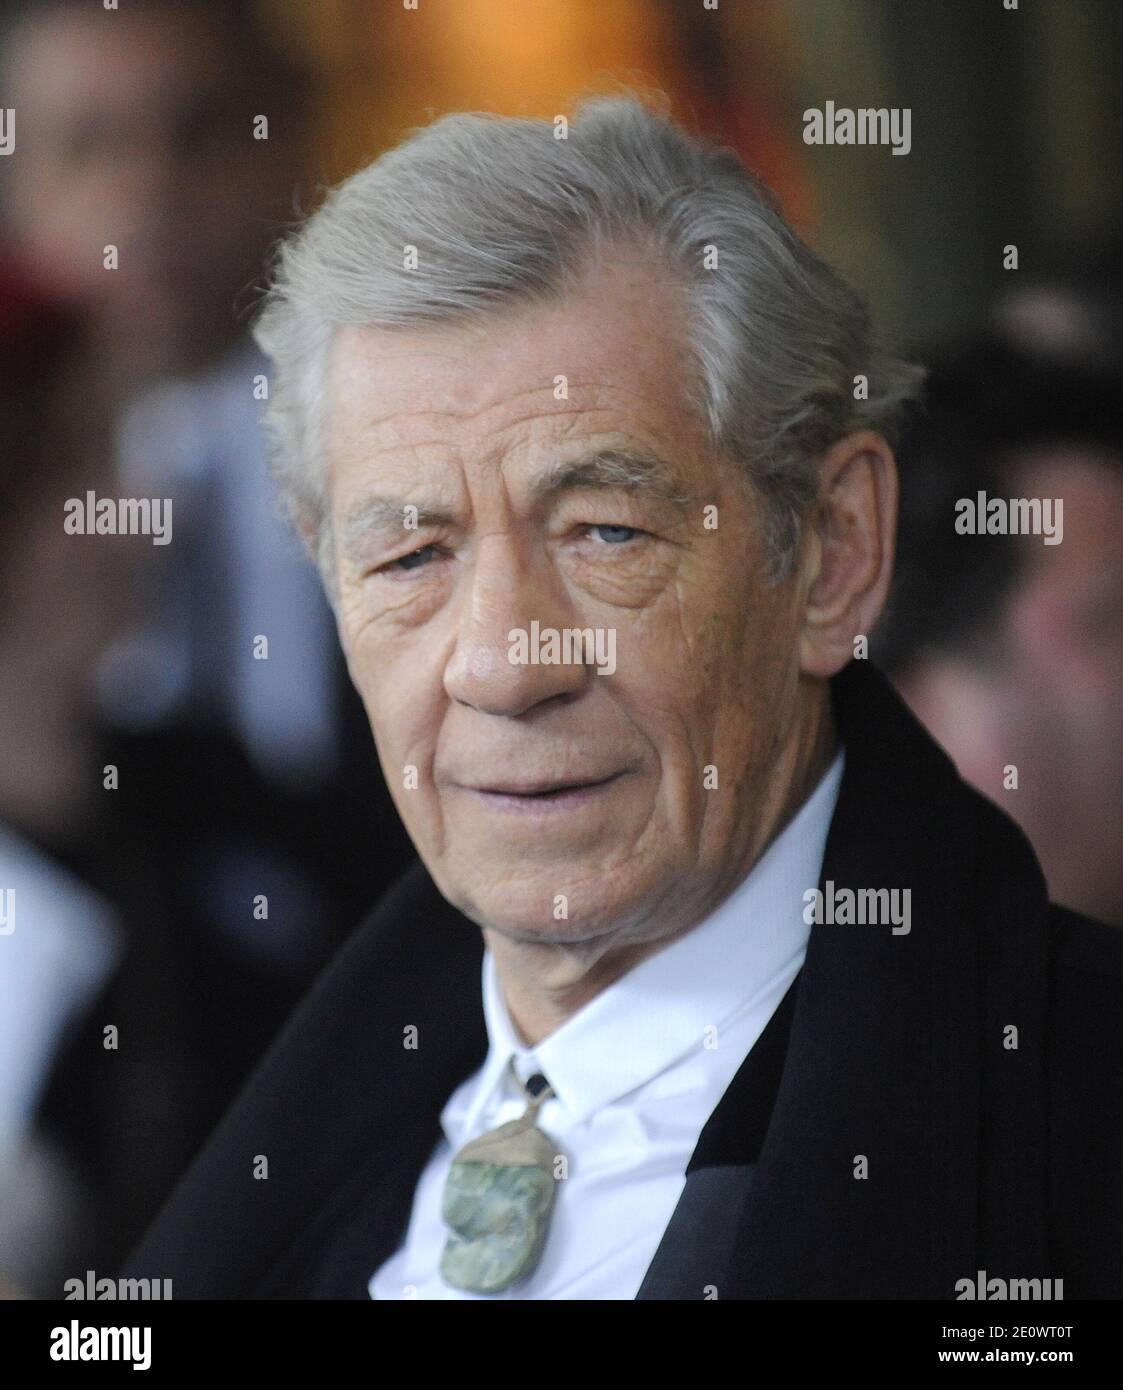 Ian McKellen attending the premiere of 'The Hobbit: An Unexpected Journey' held at The Ziegfeld Theatre in New York City, NY, USA on December 06, 2012. Photo by Brad Barket/ABACAPRESS.COM Stock Photo